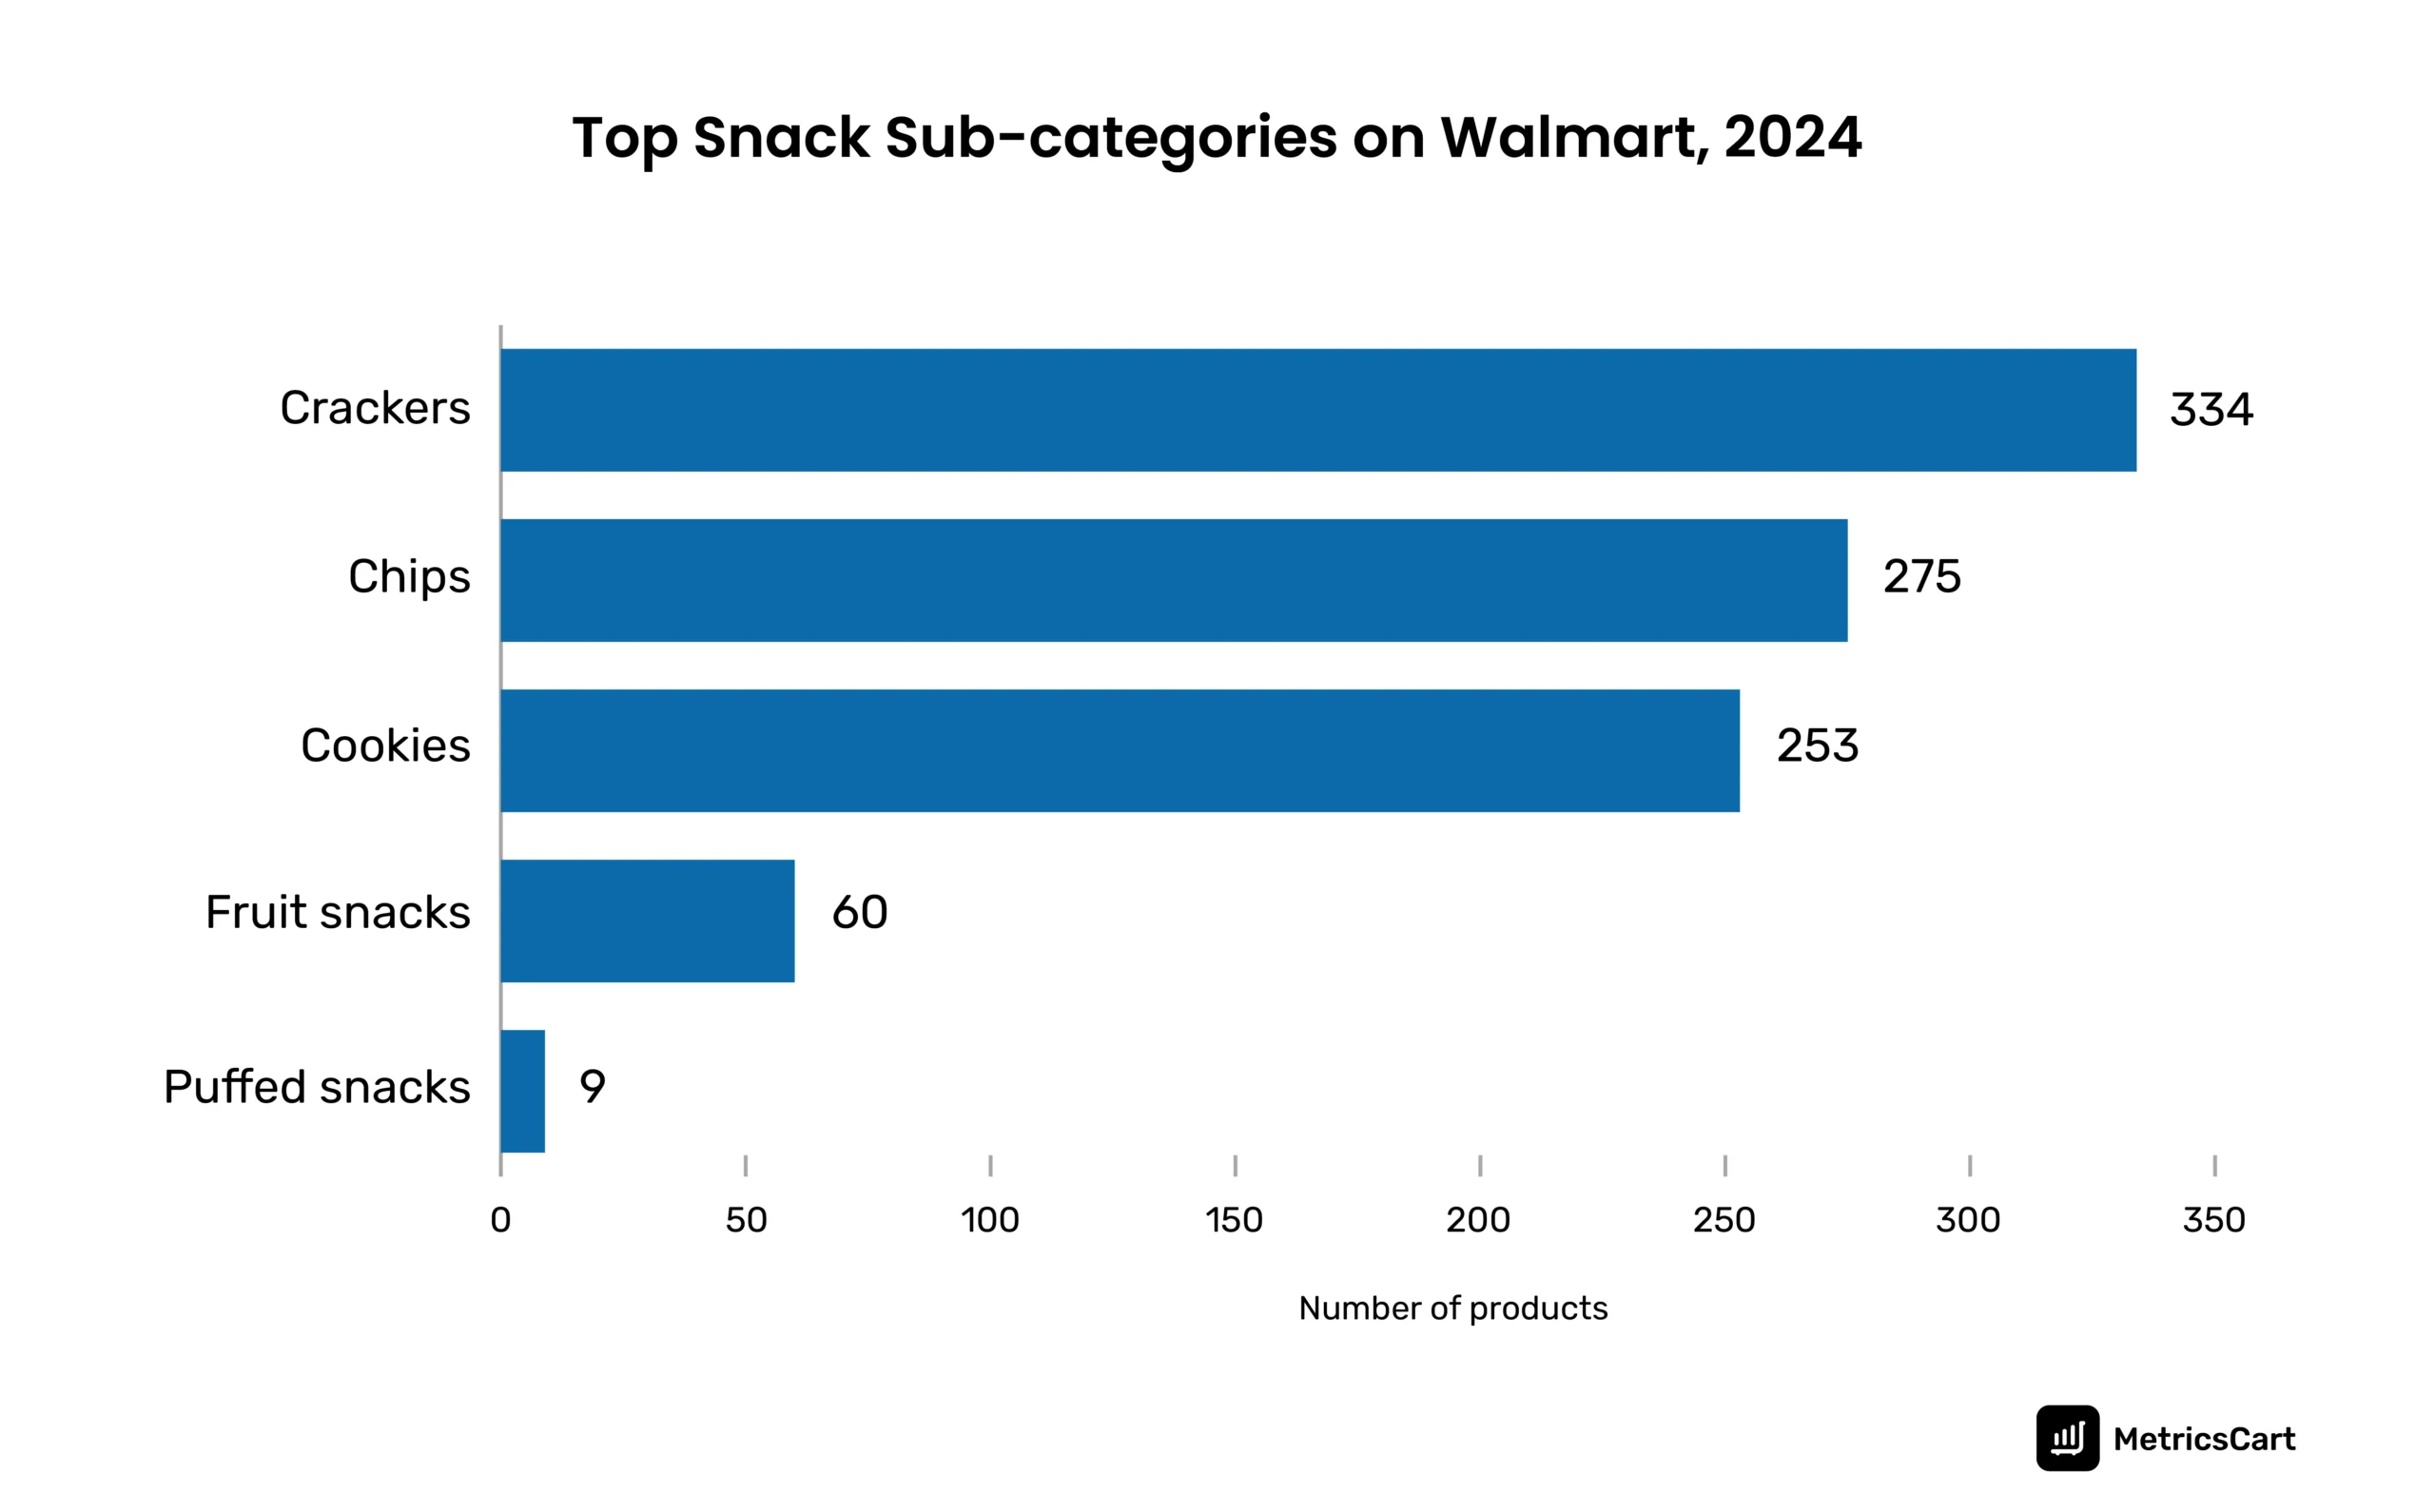 The bar graph shows the total number of different snack subcategories offered by Walmart in 2024